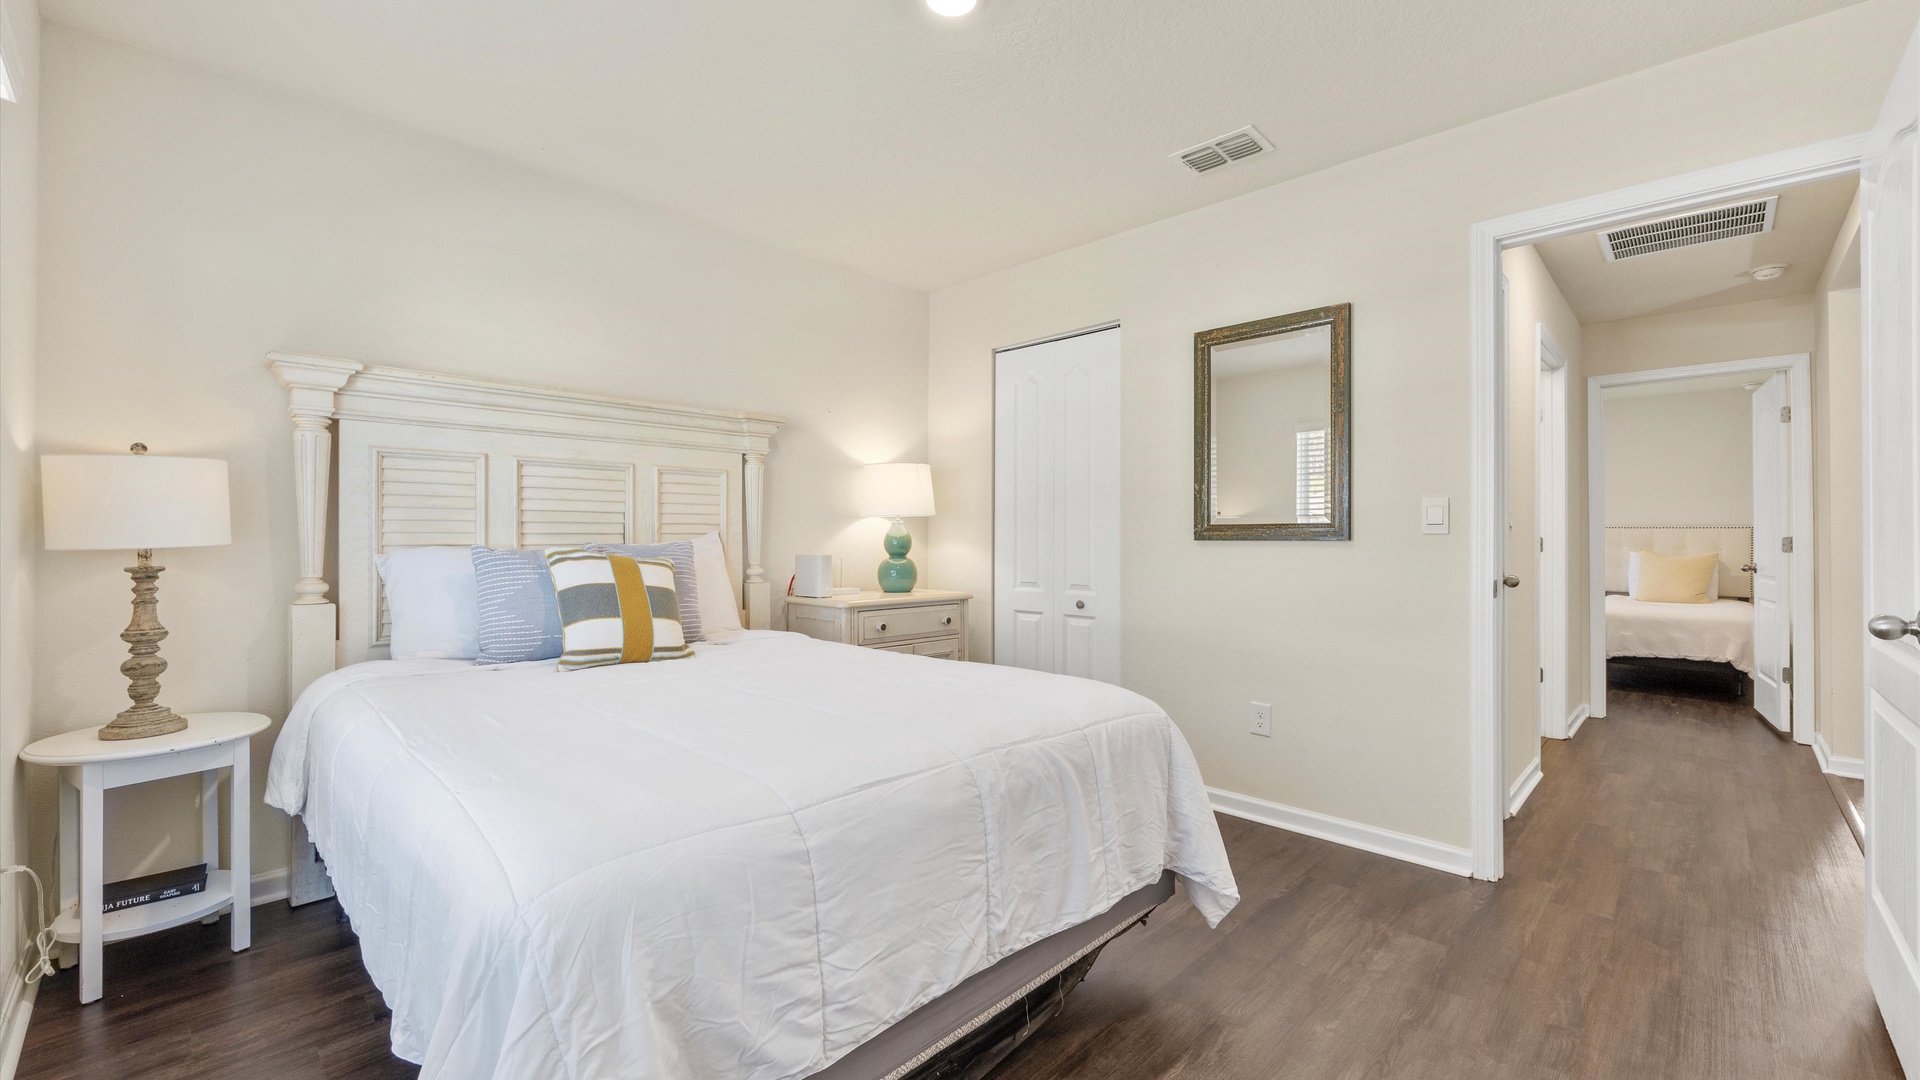 This spacious bedroom includes a queen-sized bed & Smart TV